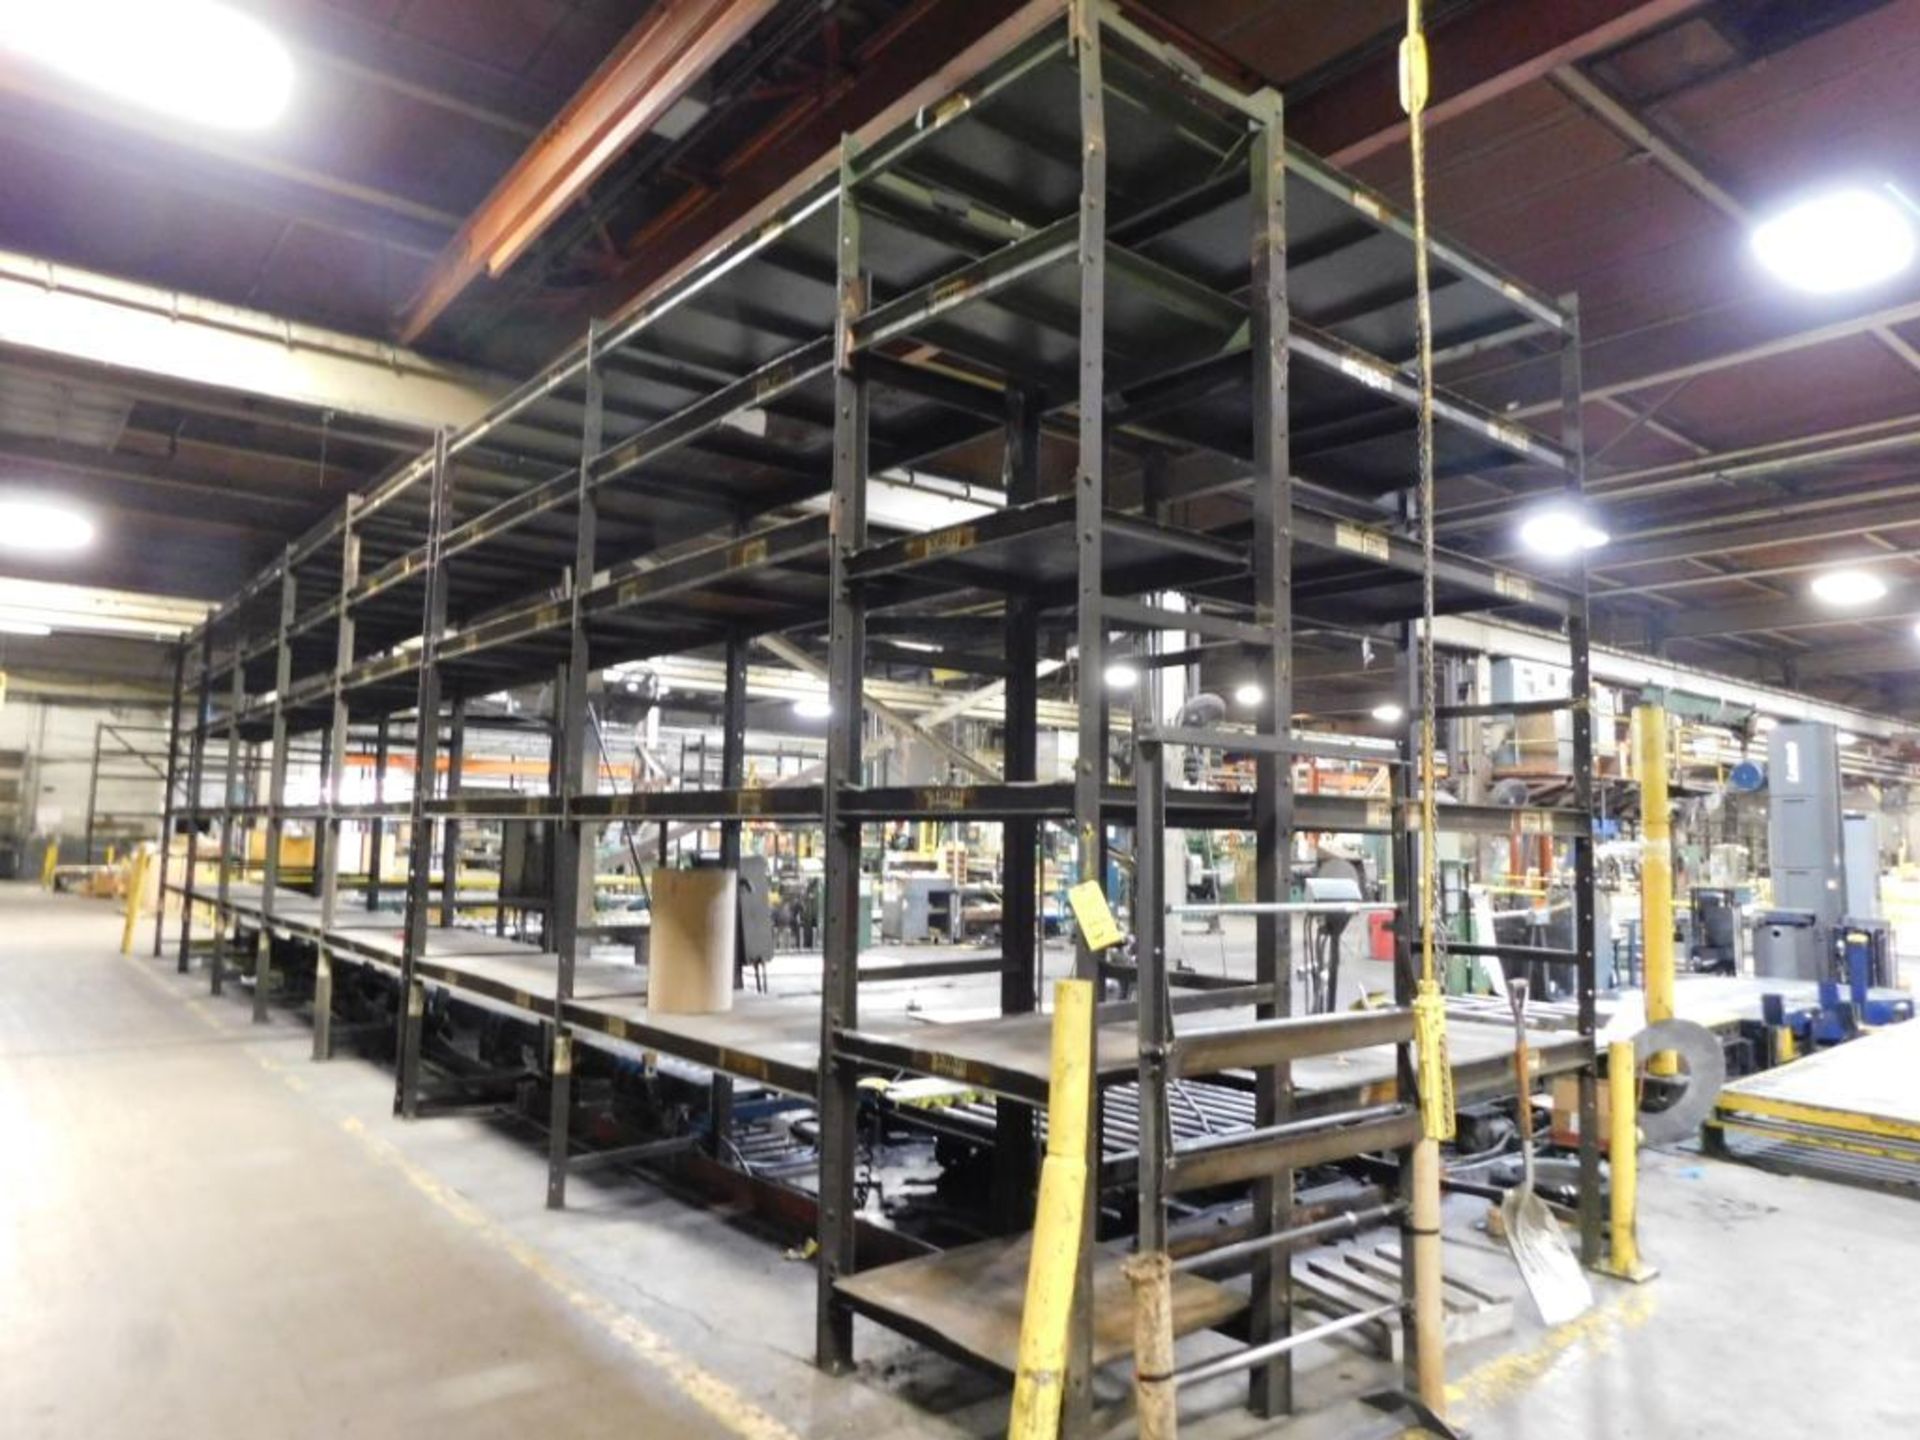 LOT: (11) Sections 12 ft. High x 7 ft. Wide x 36 in. Deep Bolt Together Steel Rack